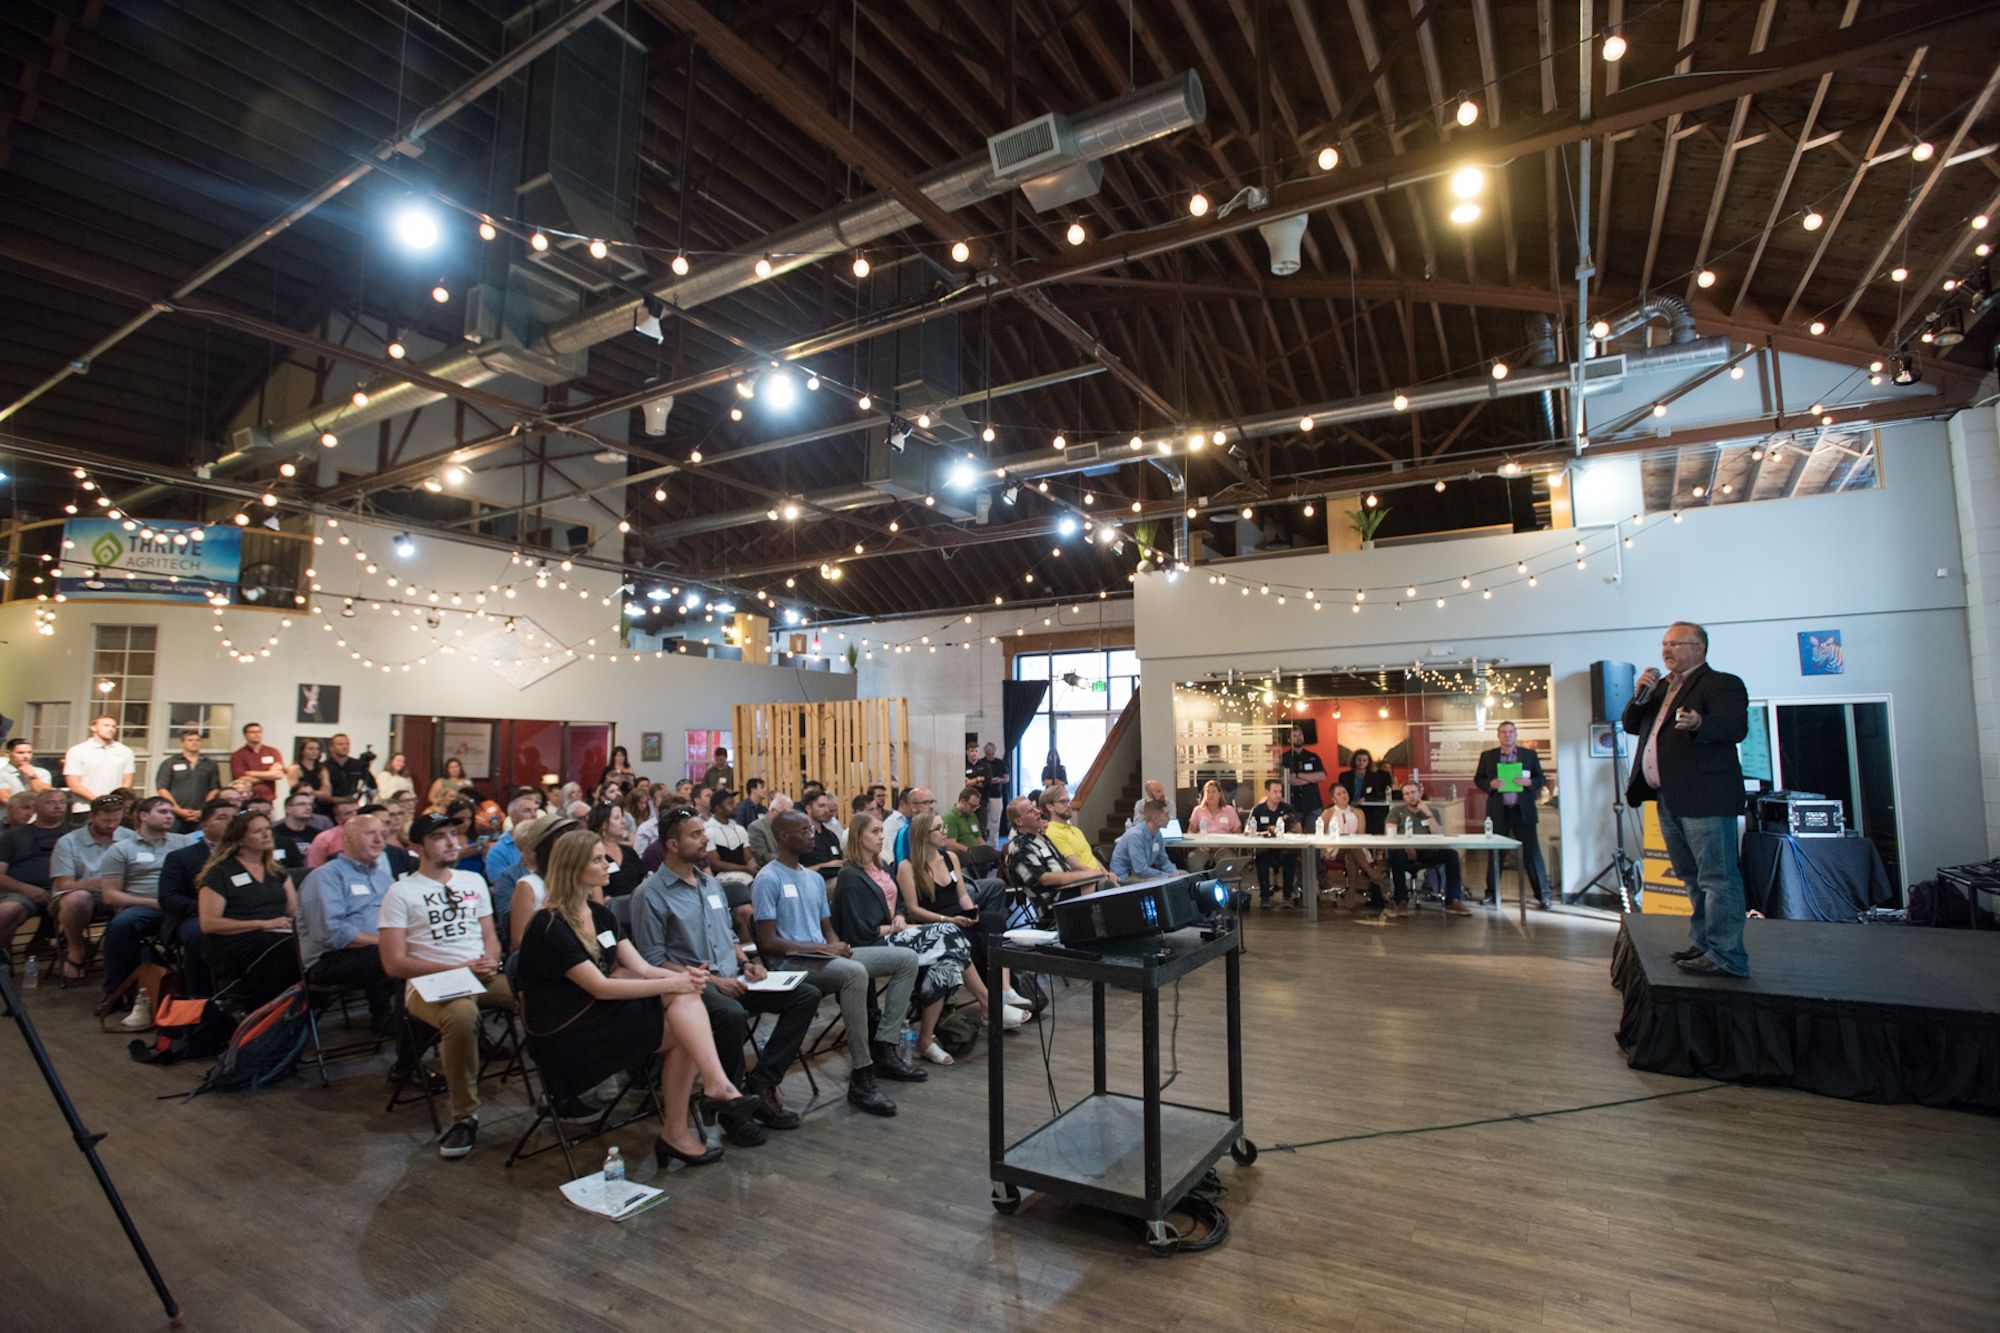 6 Proven Ways to Win a Cannabusiness Pitch Contest